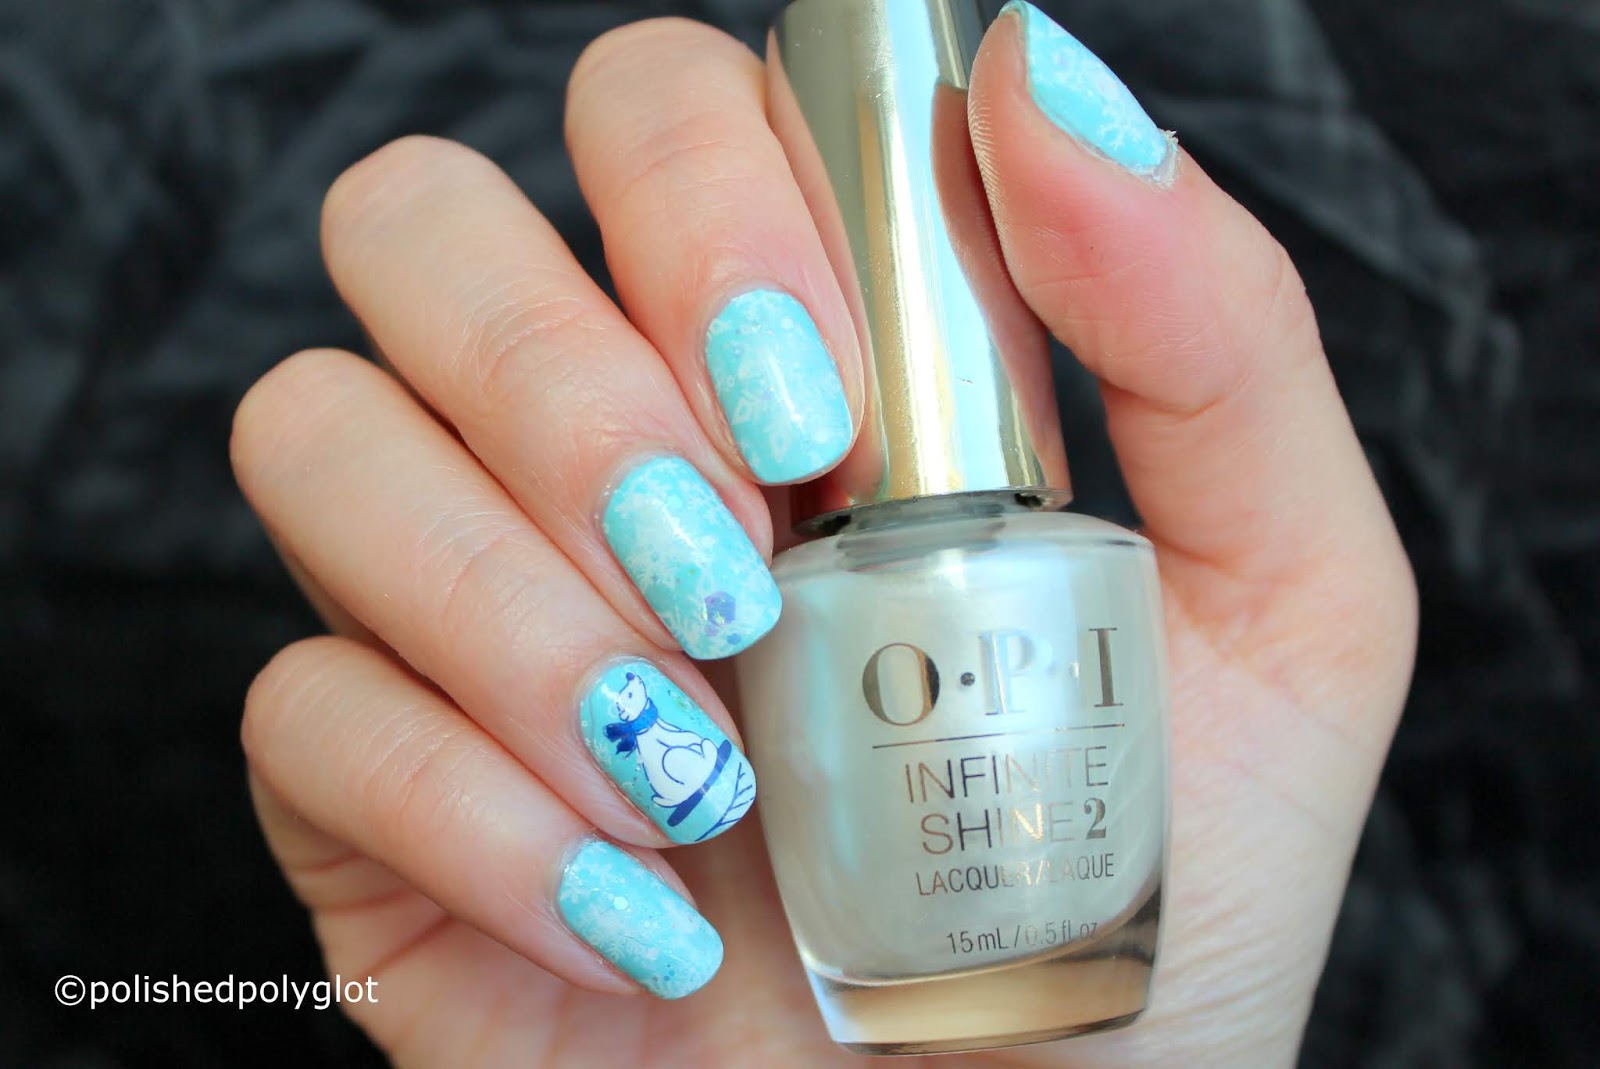 8. Nail Art Pictures for Winter - wide 9